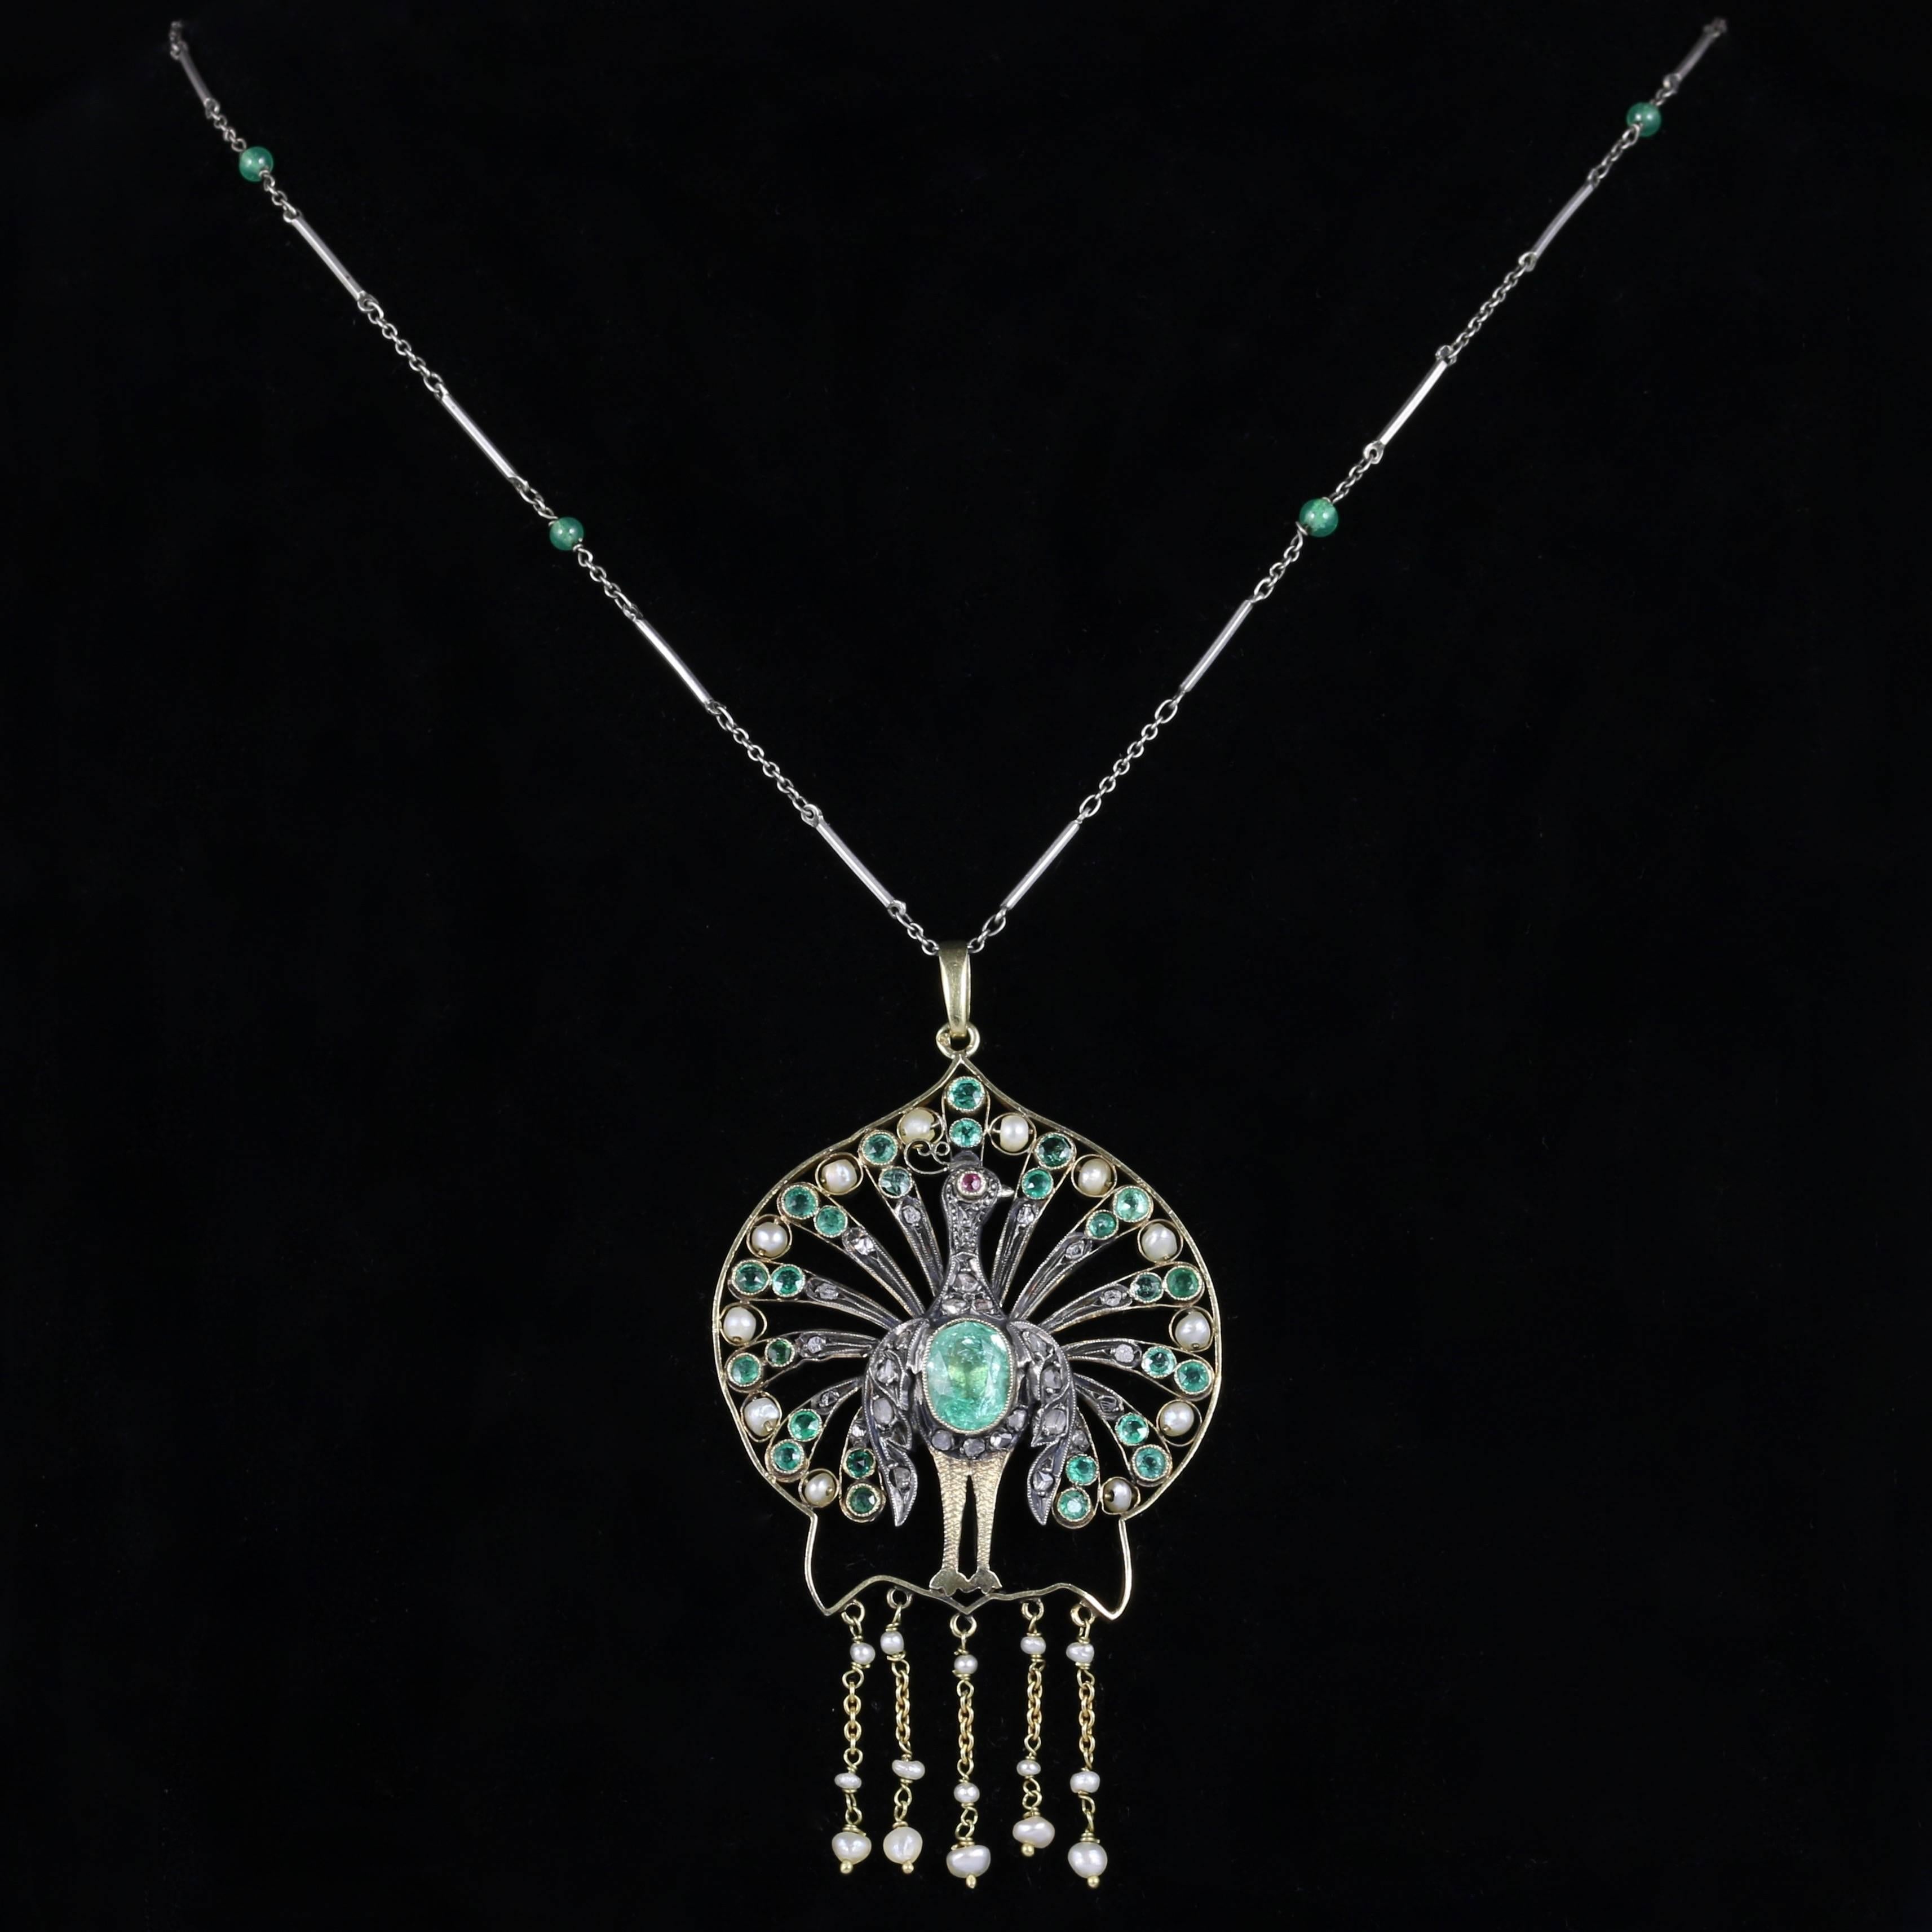 This genuine French Antique Victorian Emerald Peacock necklace is exceptional, it really is one of the most outstanding peacock pendants we have ever exhibited for sale.

Circa 1880

Set with fabulous rich green peacocks on a Platinum chain leading